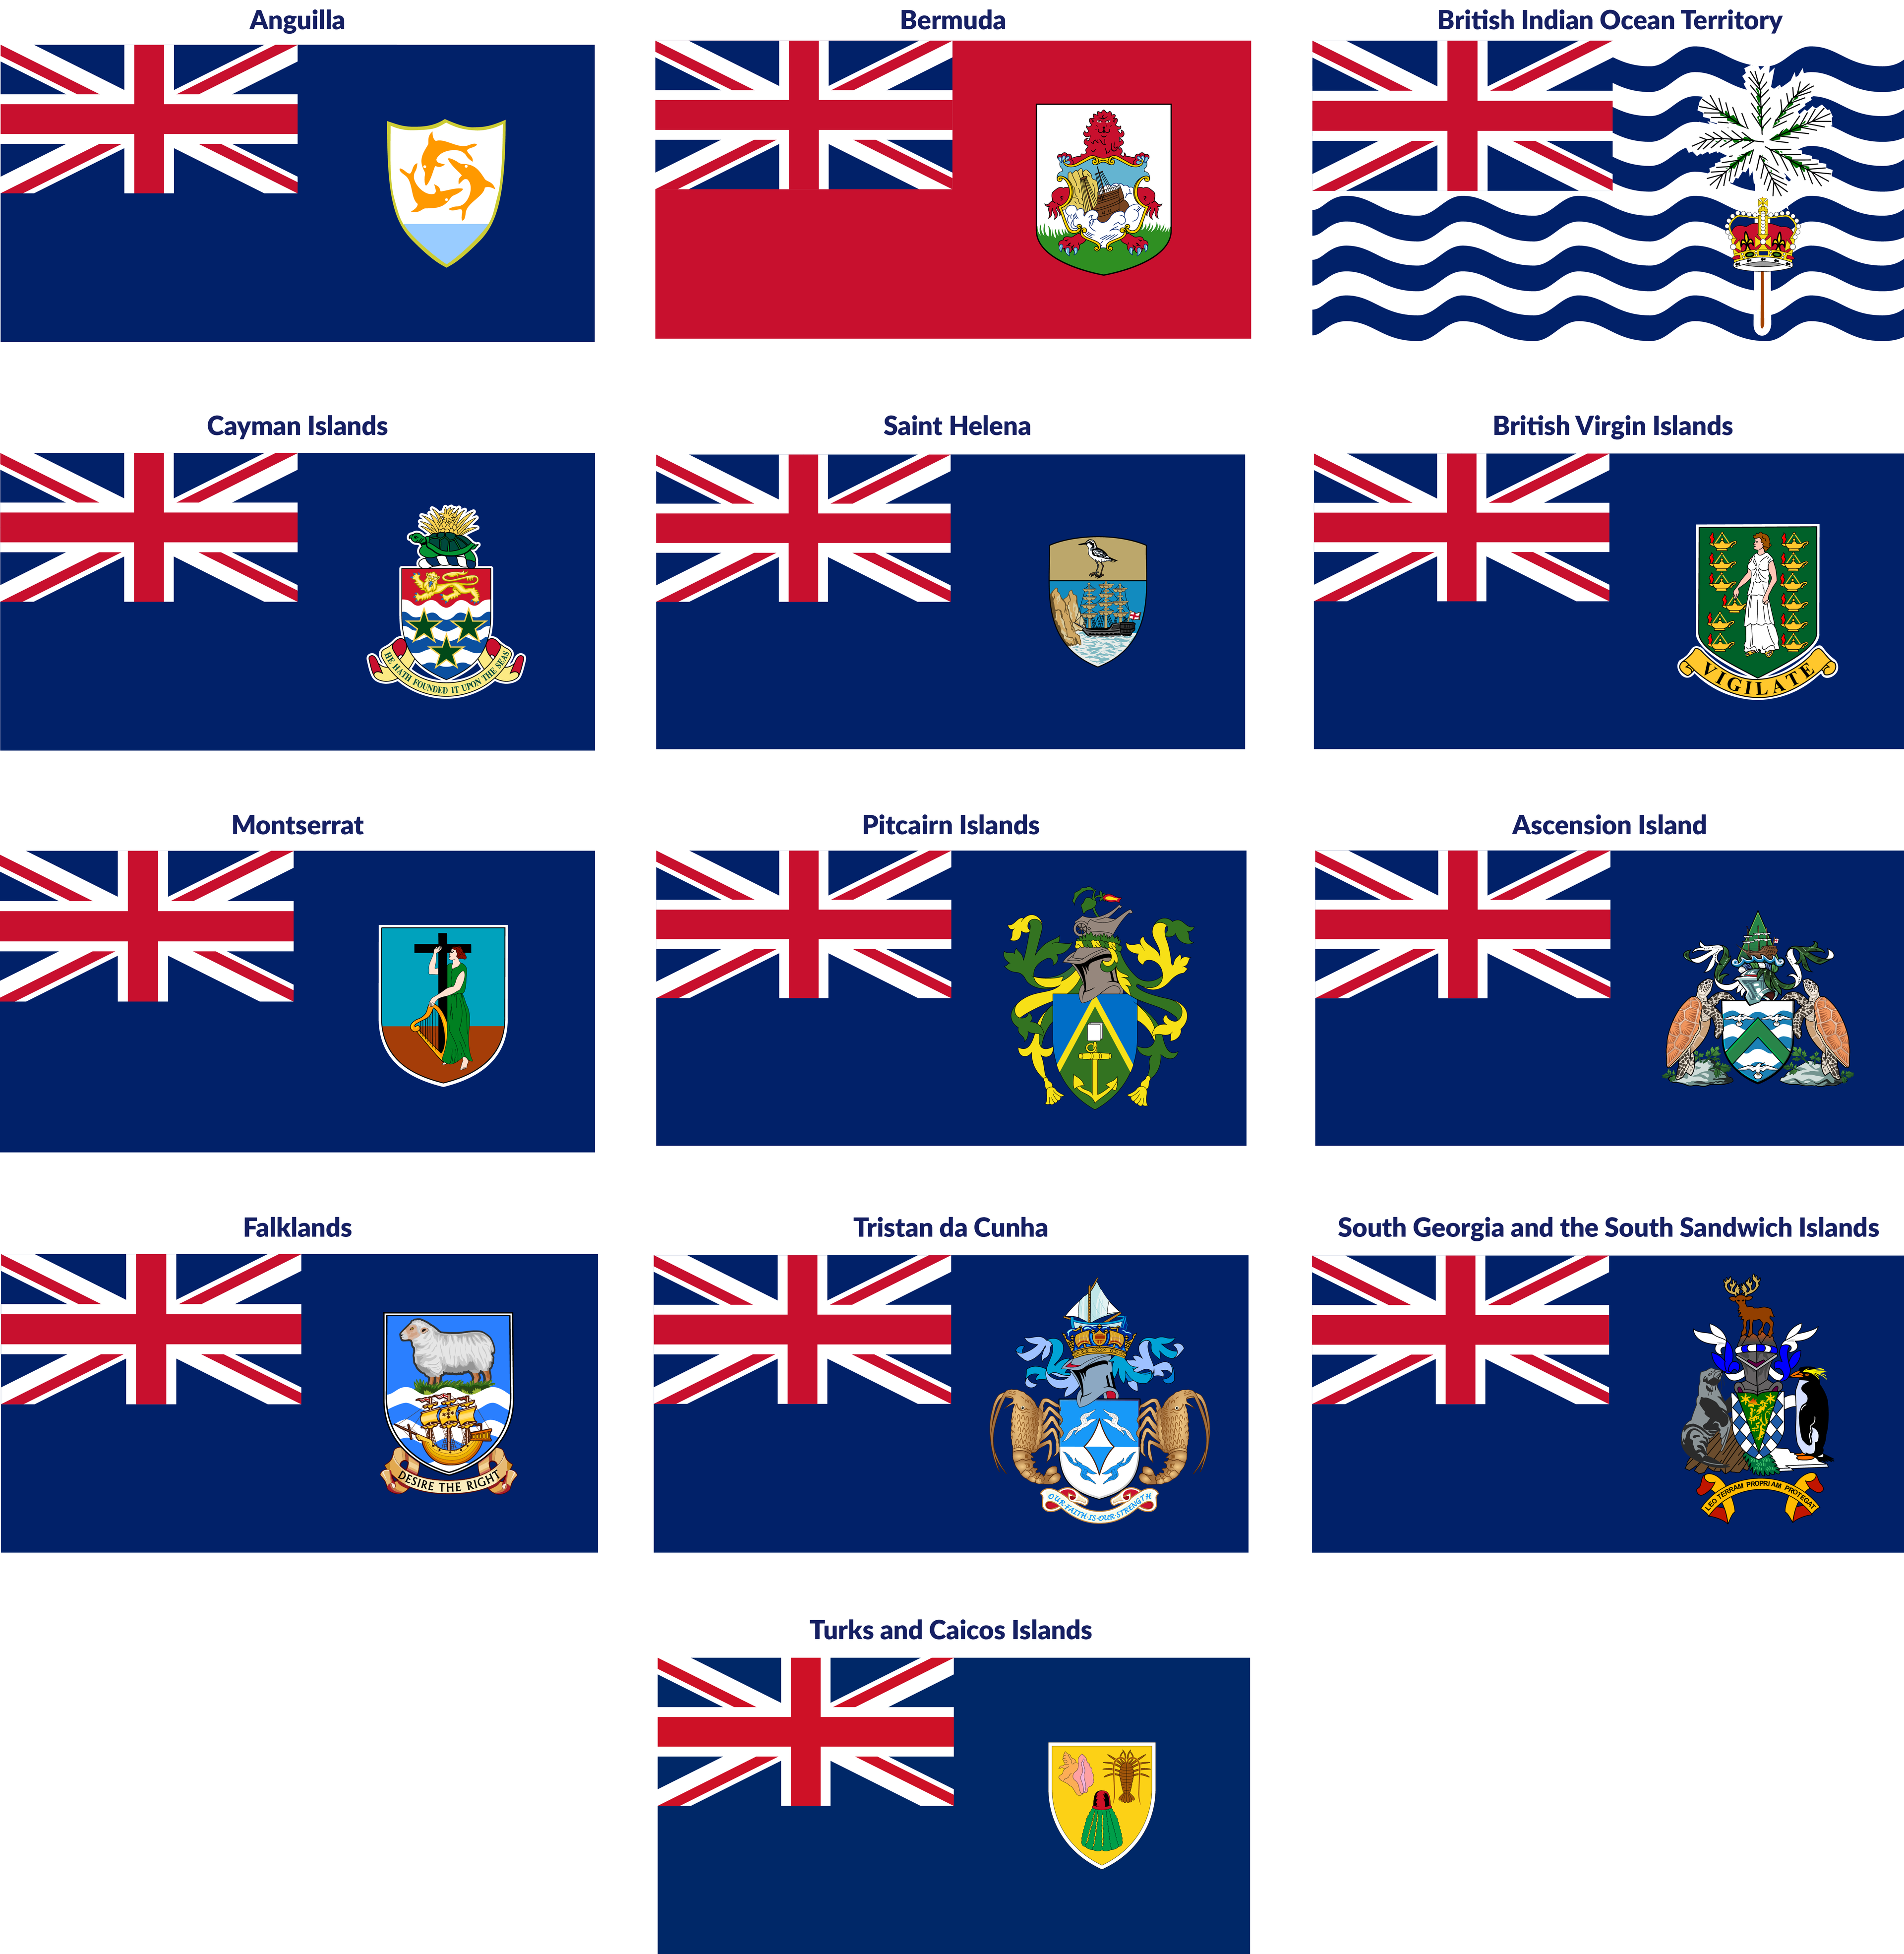 A set of 13 flags that contain the Union Jack.